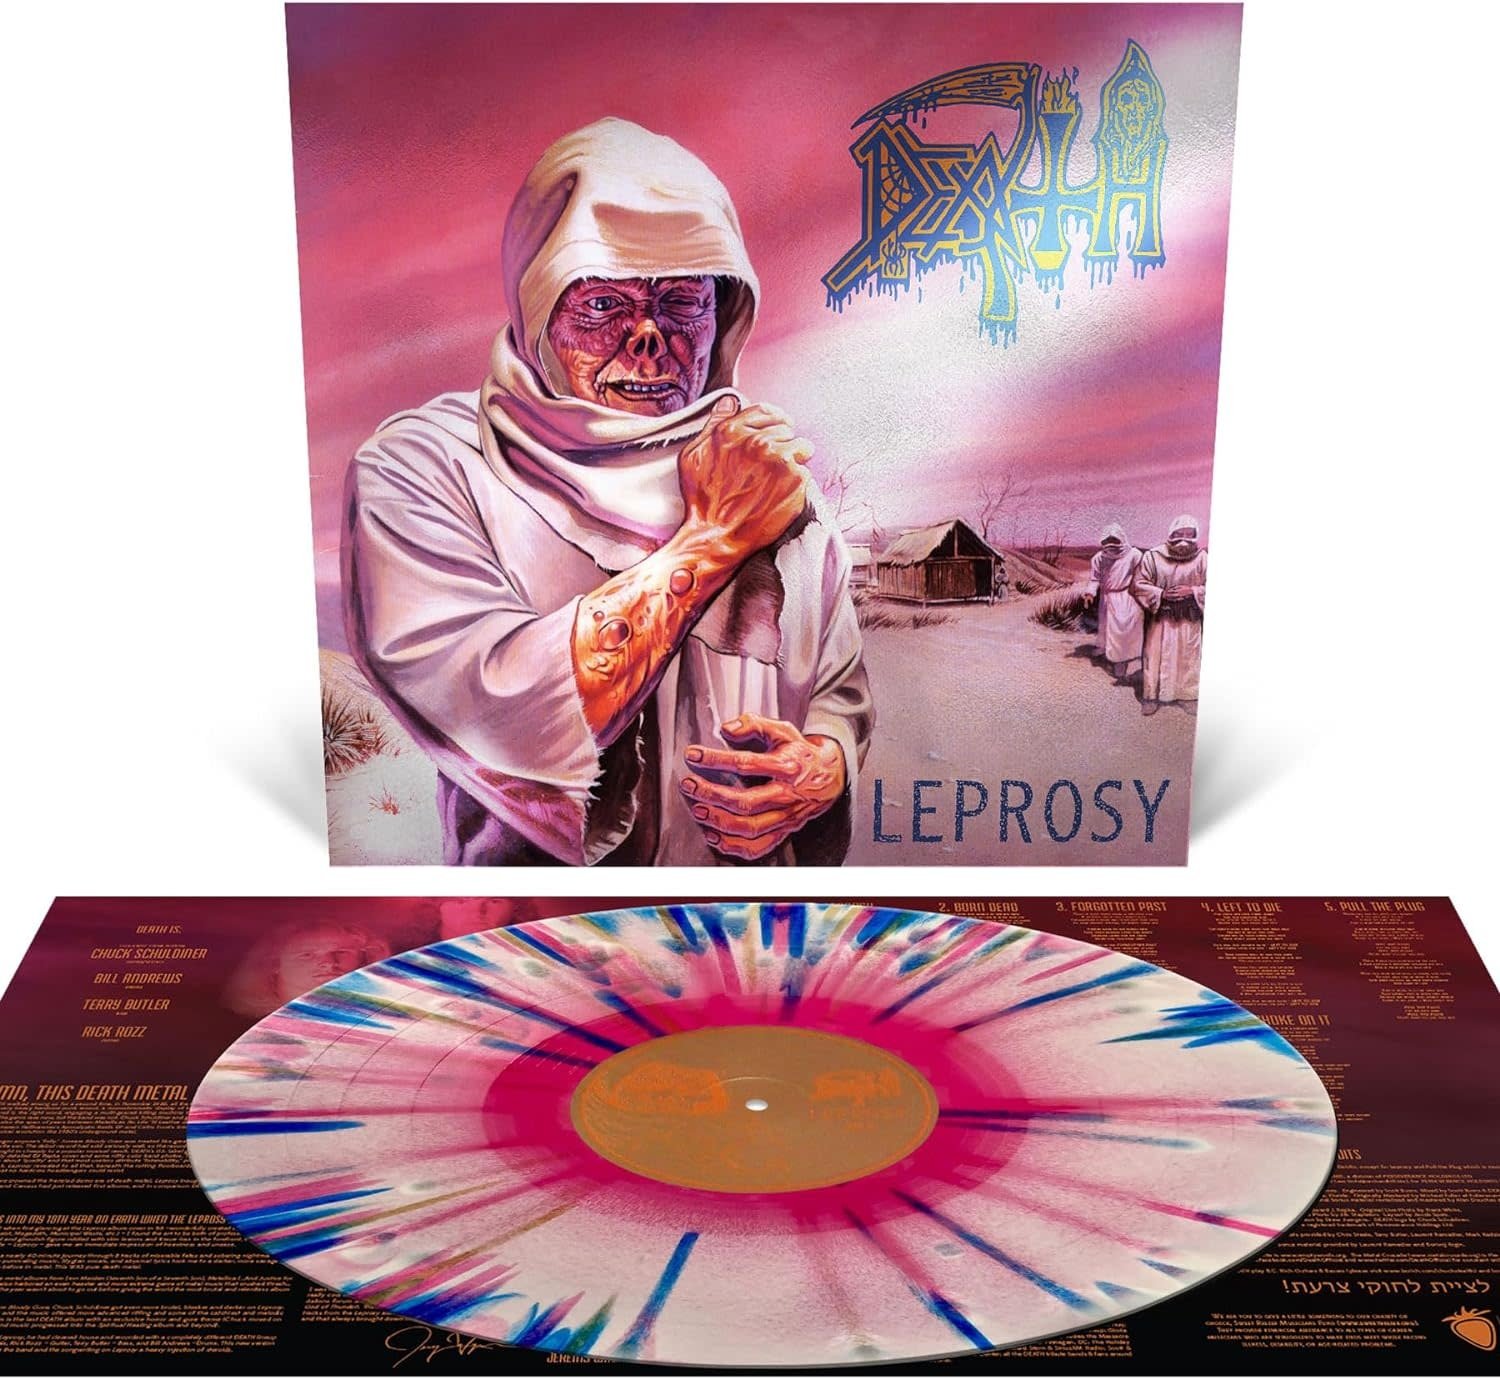 Metal Death - Leprosy (Hot Pink, Bone White, Blue Jay Tri-Colour With Splatter)